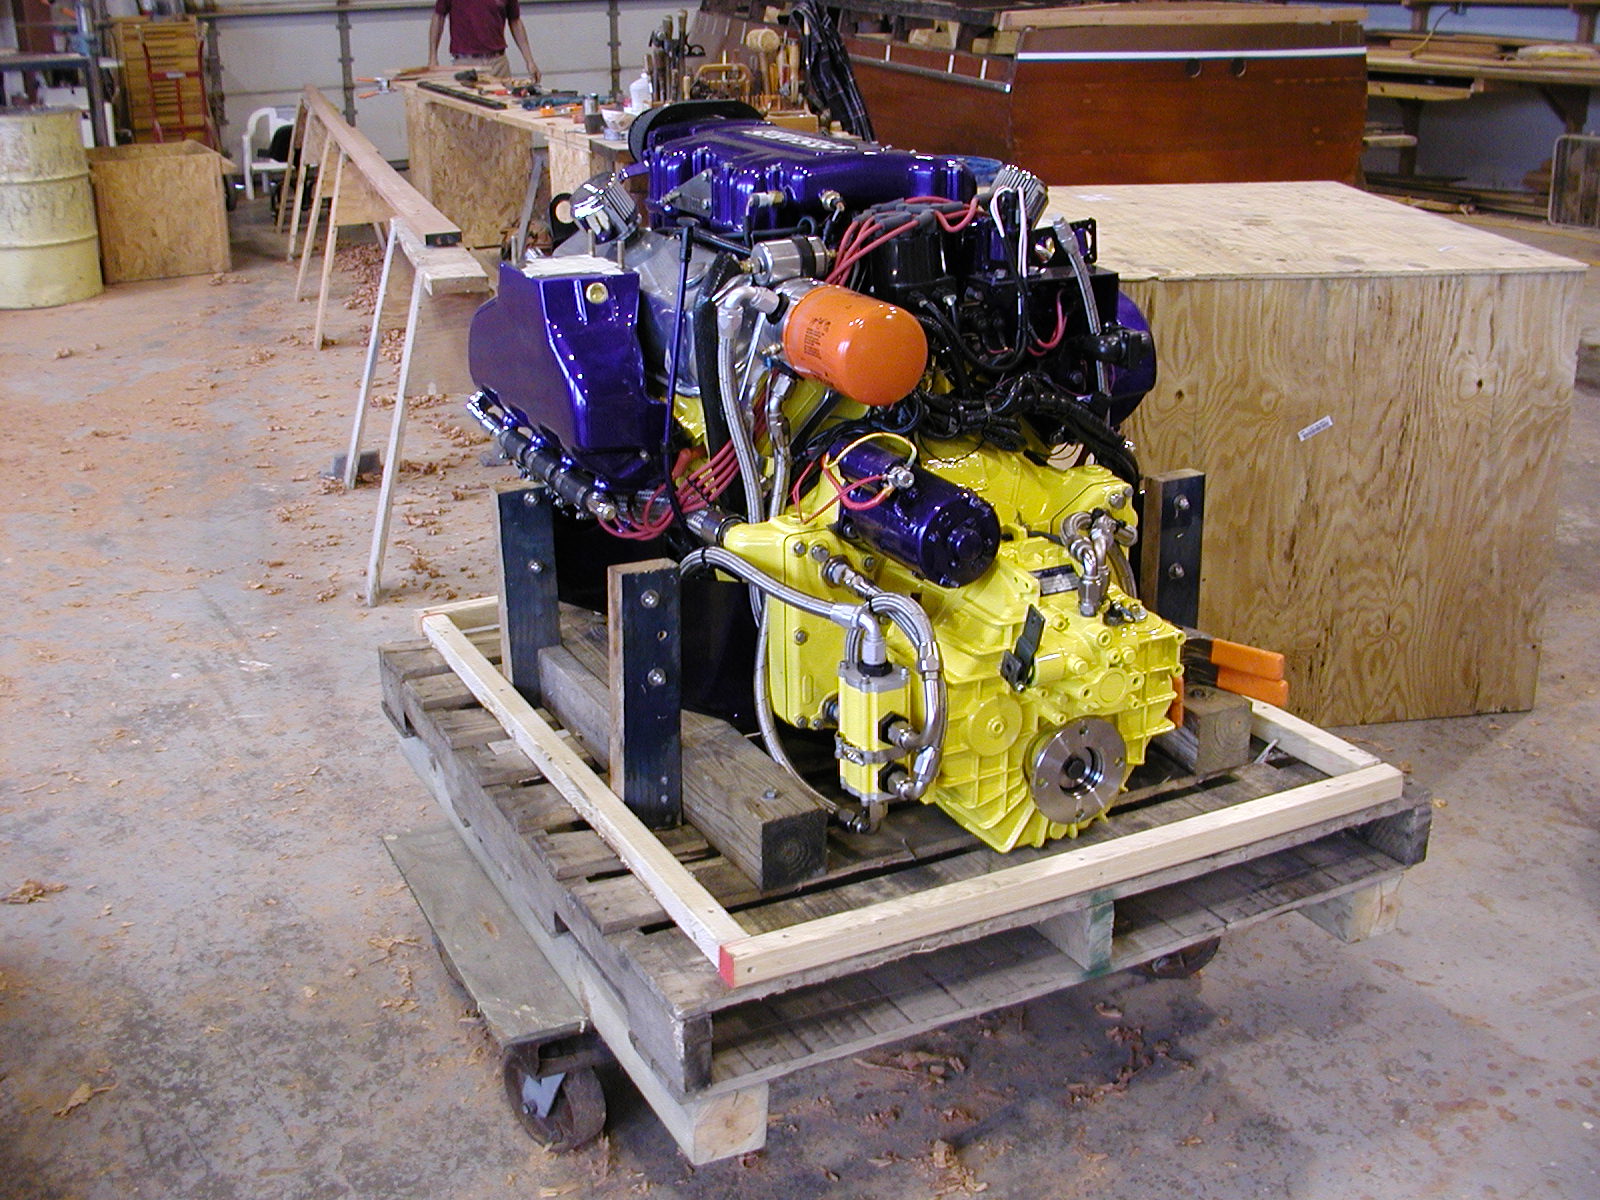 Purple and yellow color combination on custom engine of Jacqueline